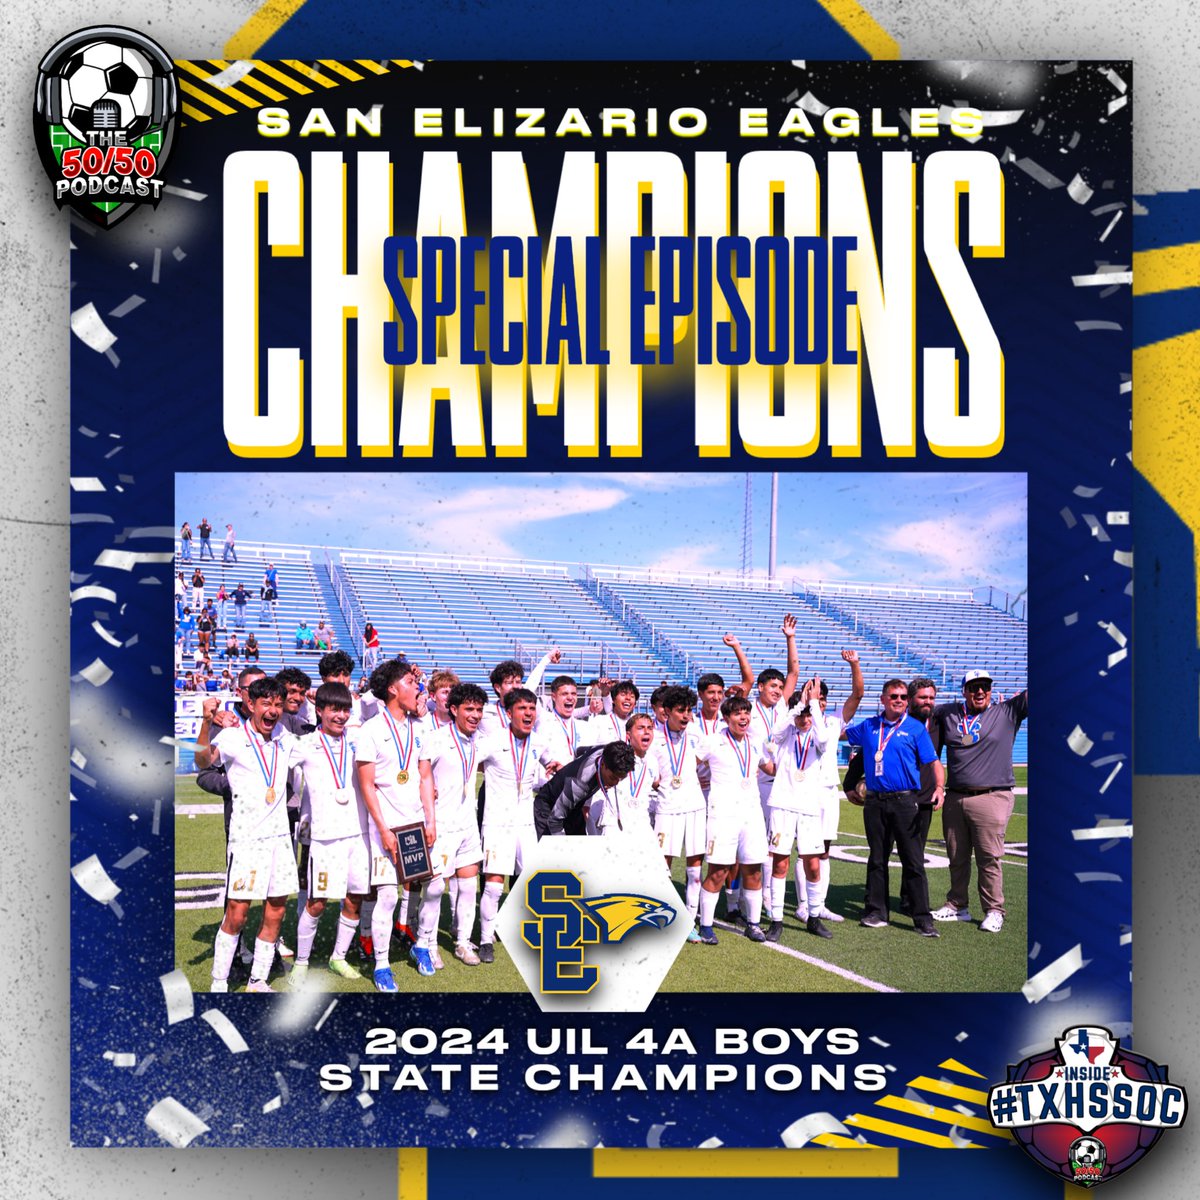 TODAY: S4 E12 , “The Champions,” featuring the #TXHSSOC 4A State Champions…don’t miss it! 🗓 Wed, Apr 24 🕚 8:10pm CST ⚽️ @CelinaSoccer 🕚 8:40pm CST/7:40pm MST ⚽️ @SEISDboysSoccer 📱 X: @50_50Pod 💻 YouTube: The 50_50 Podcast 📱IG Live: 50_50podcast